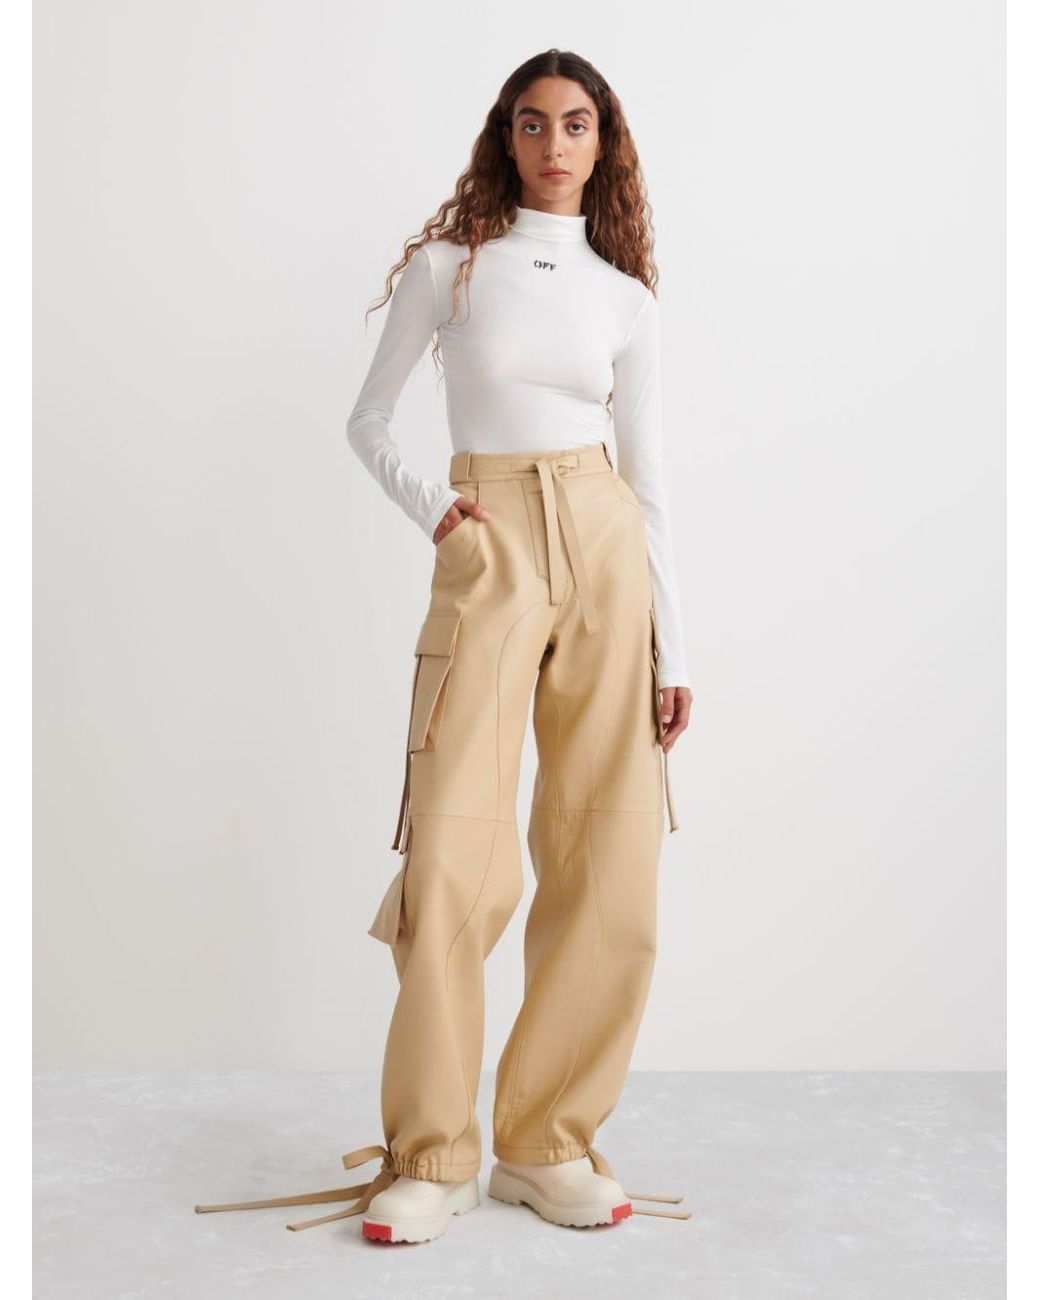 Recycled Leather 90's Pinch Waist Pants in Cream – Serafina